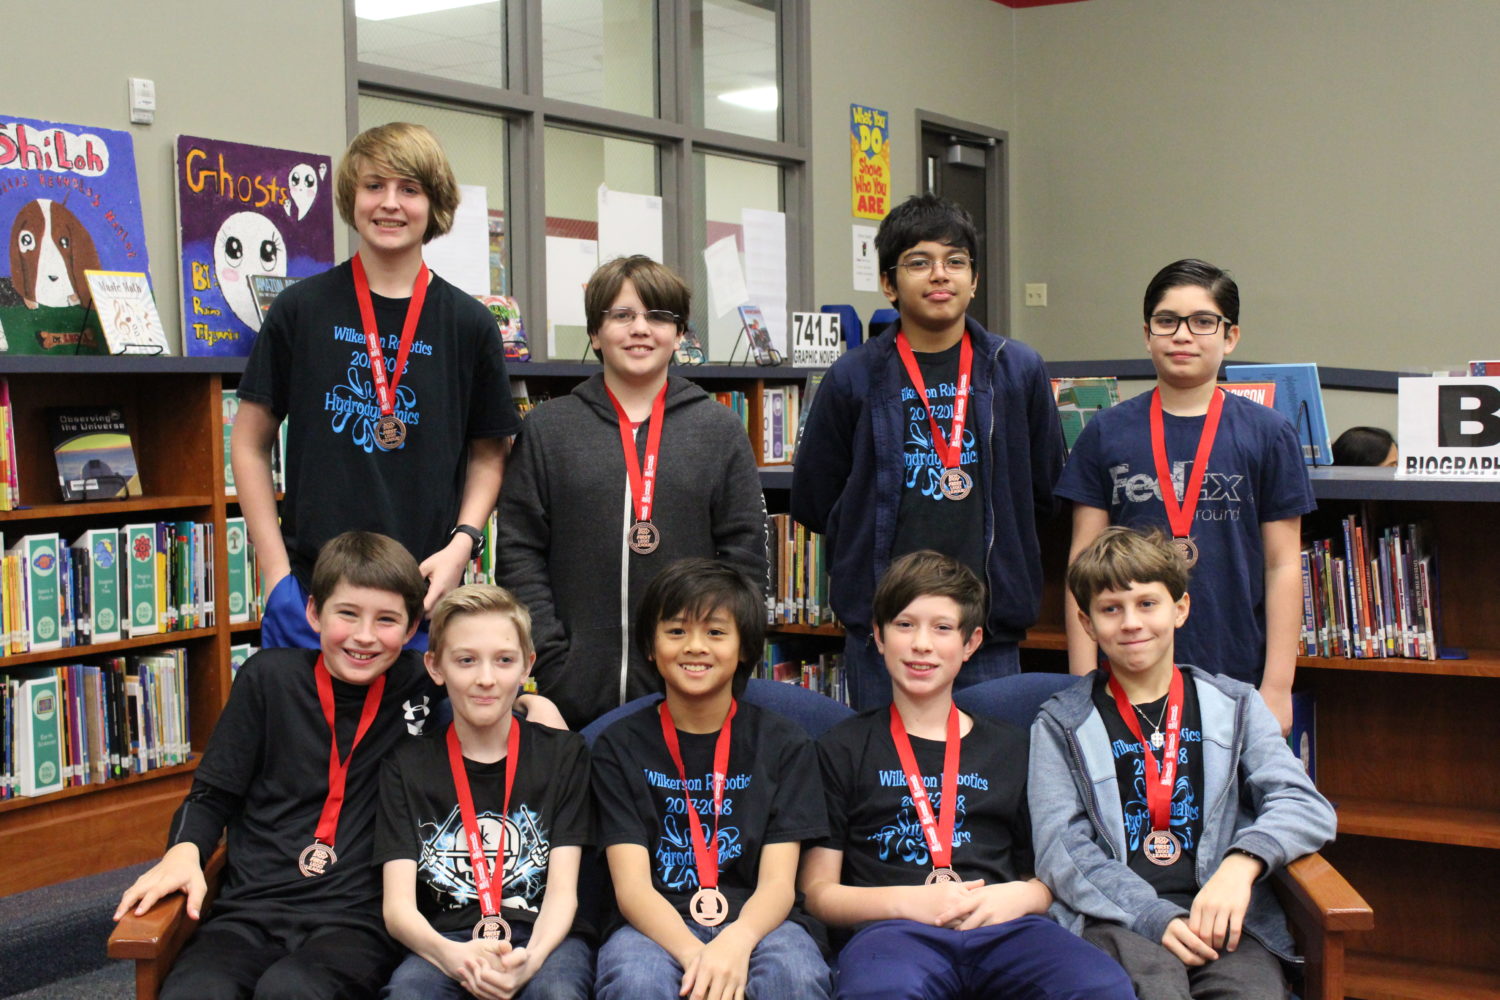 group of boys that competed at a robotics competition